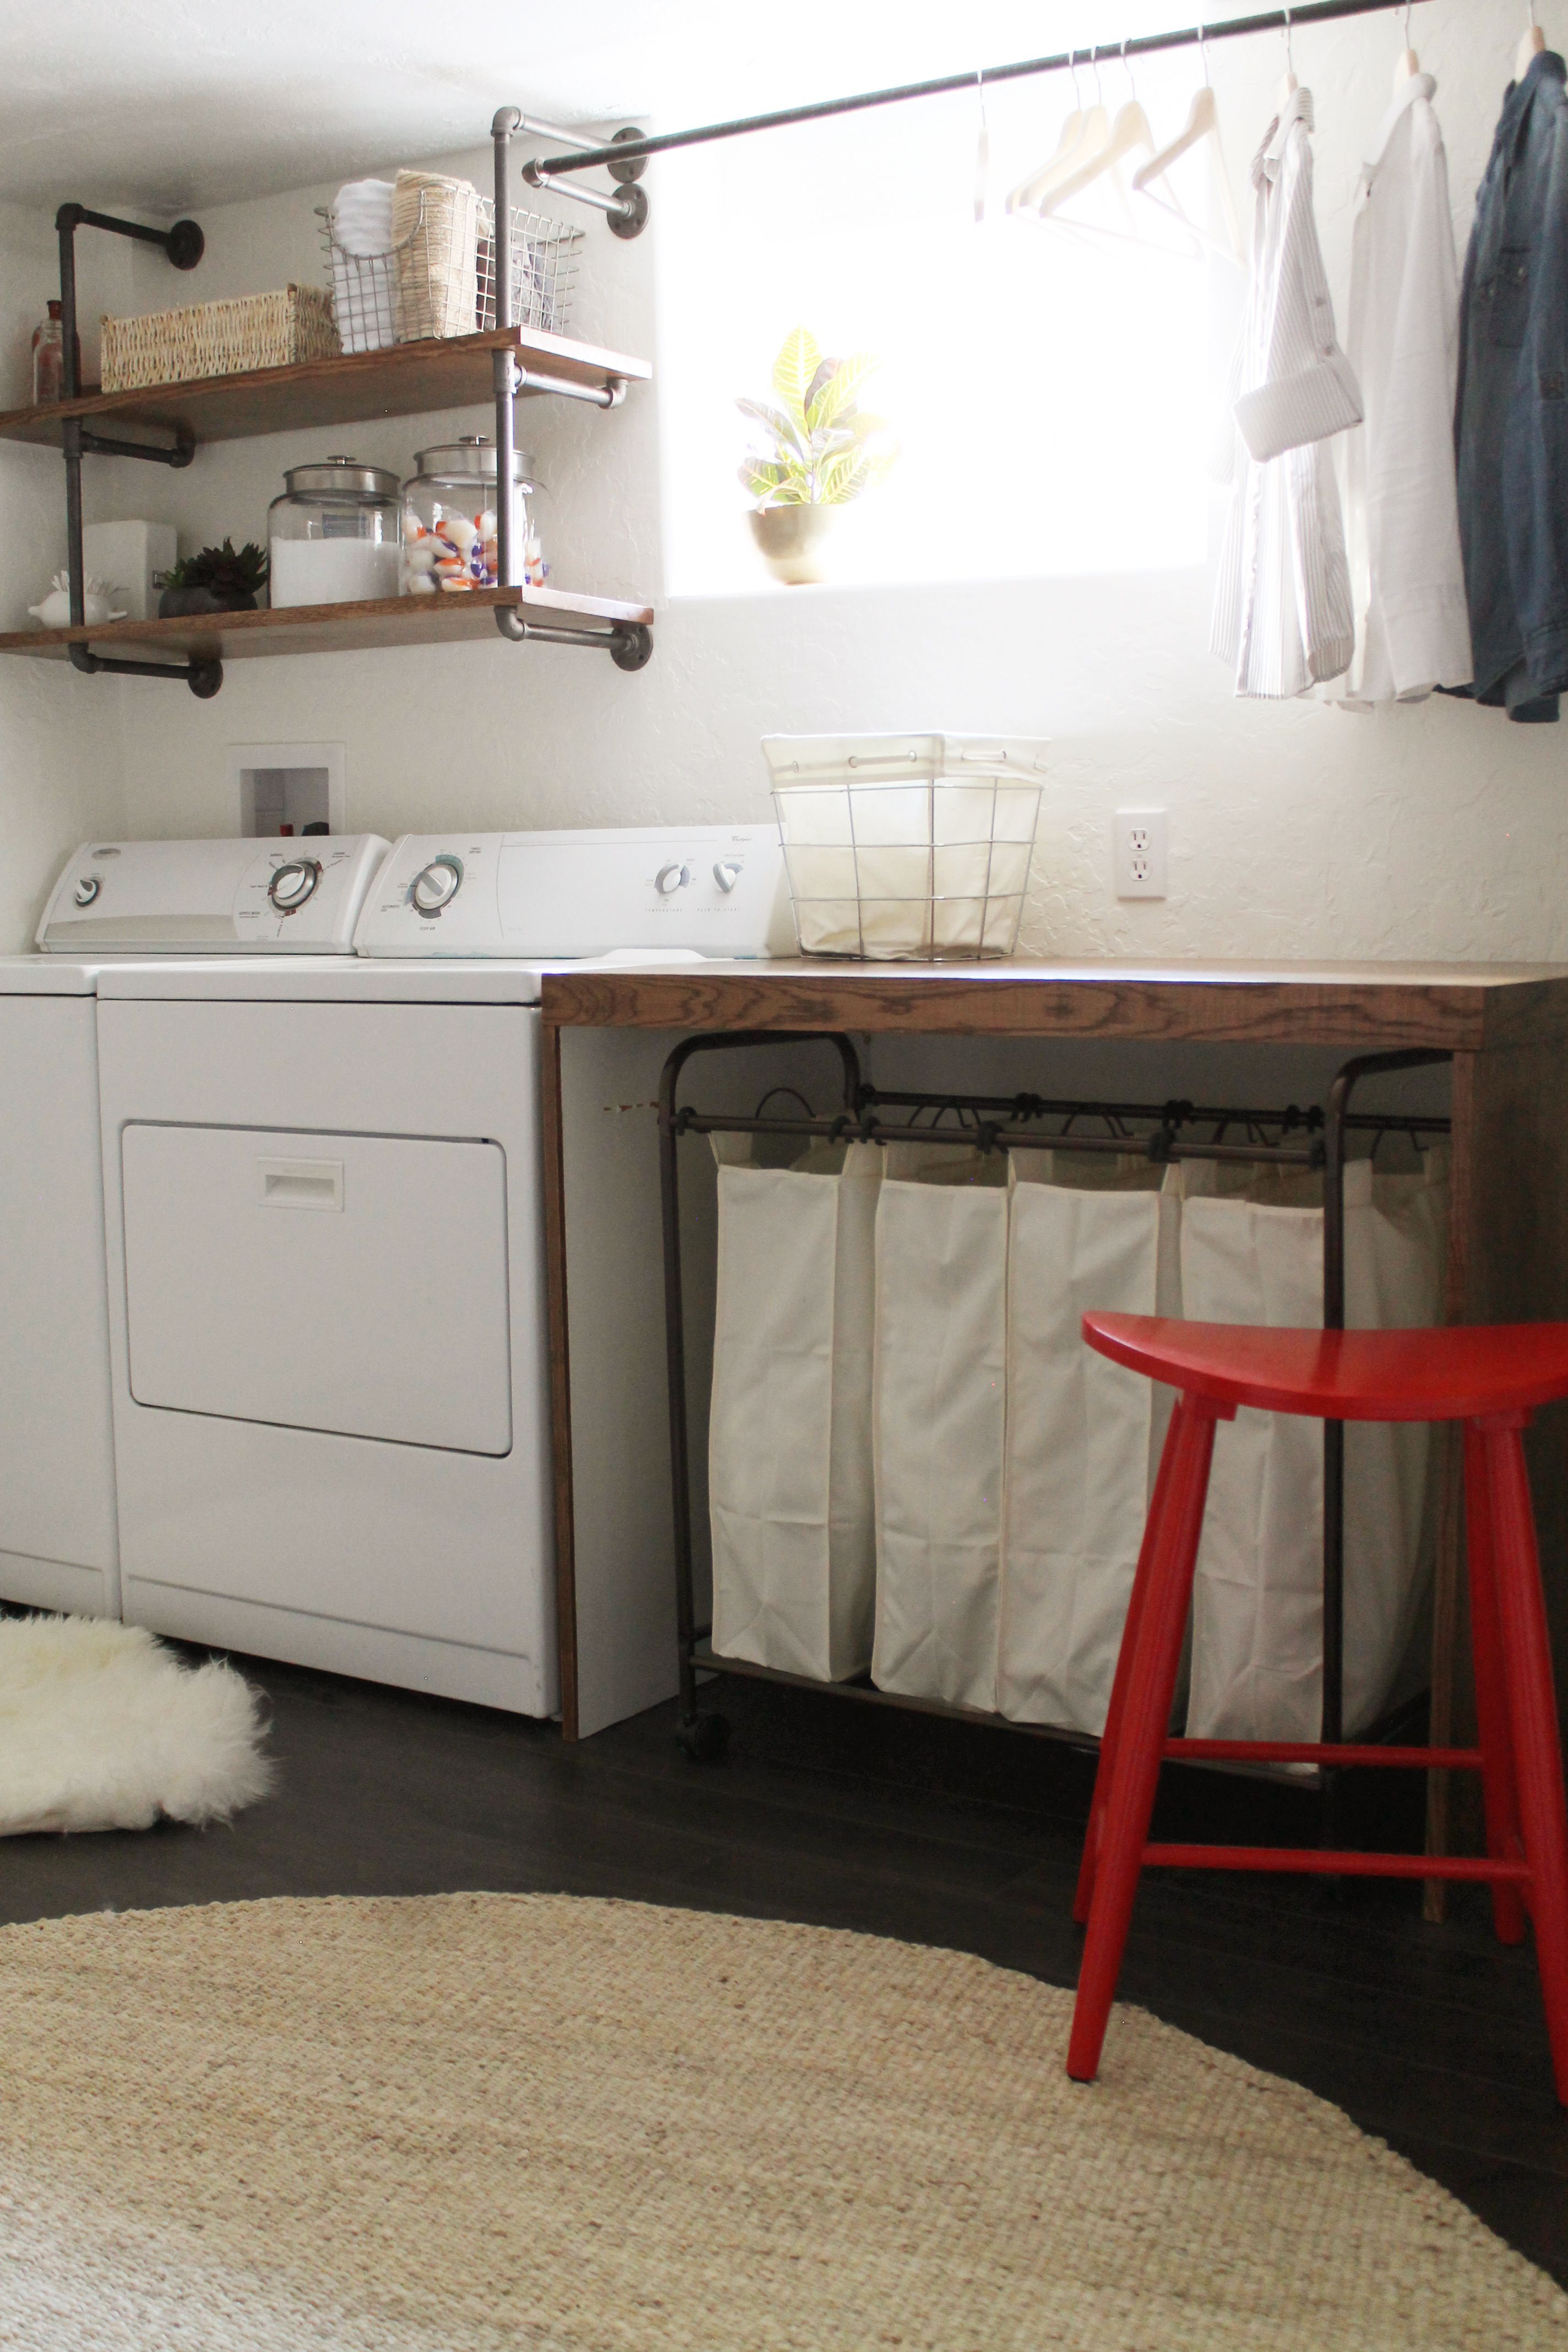 basement laundry room -- I like the simplicity of this room, the wooden folding table, the shelves ove